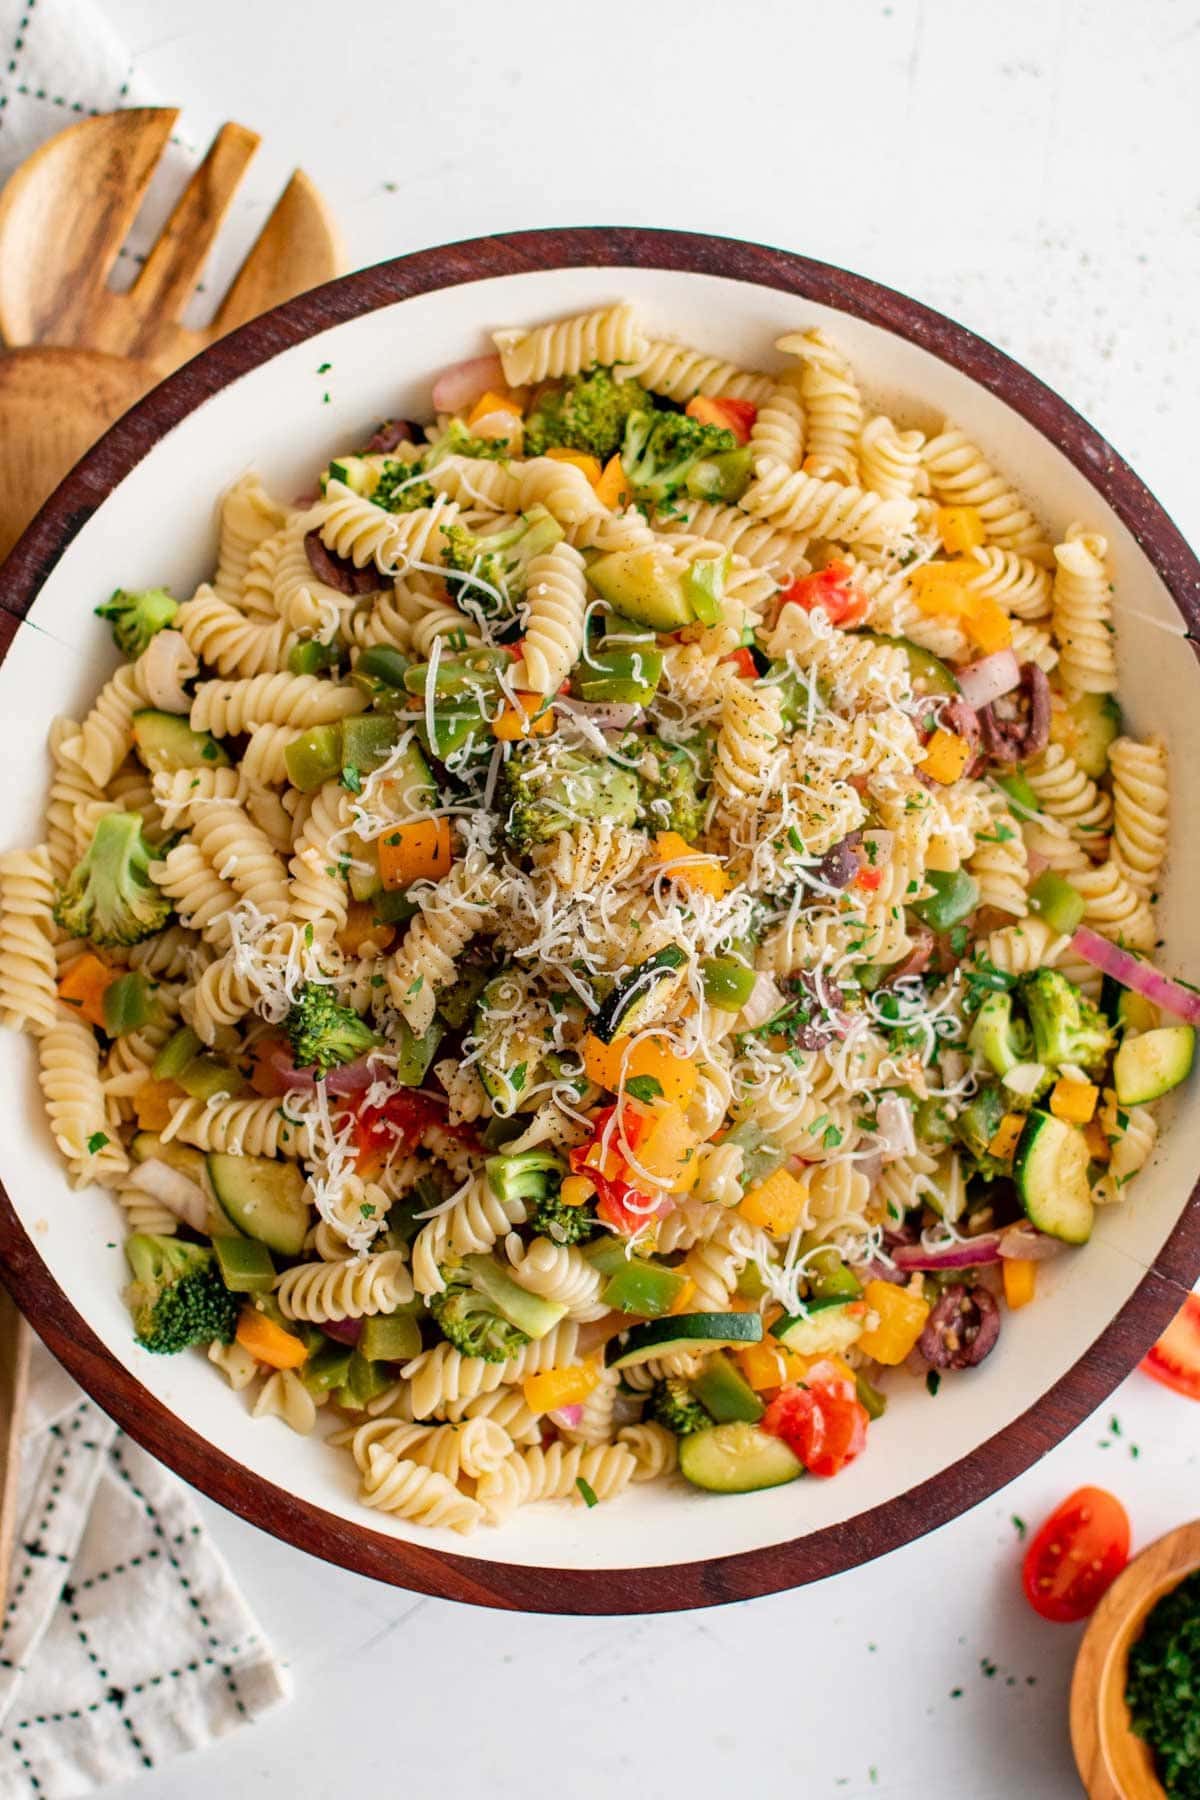 Vegetables and rotini pasta in a large bowl.